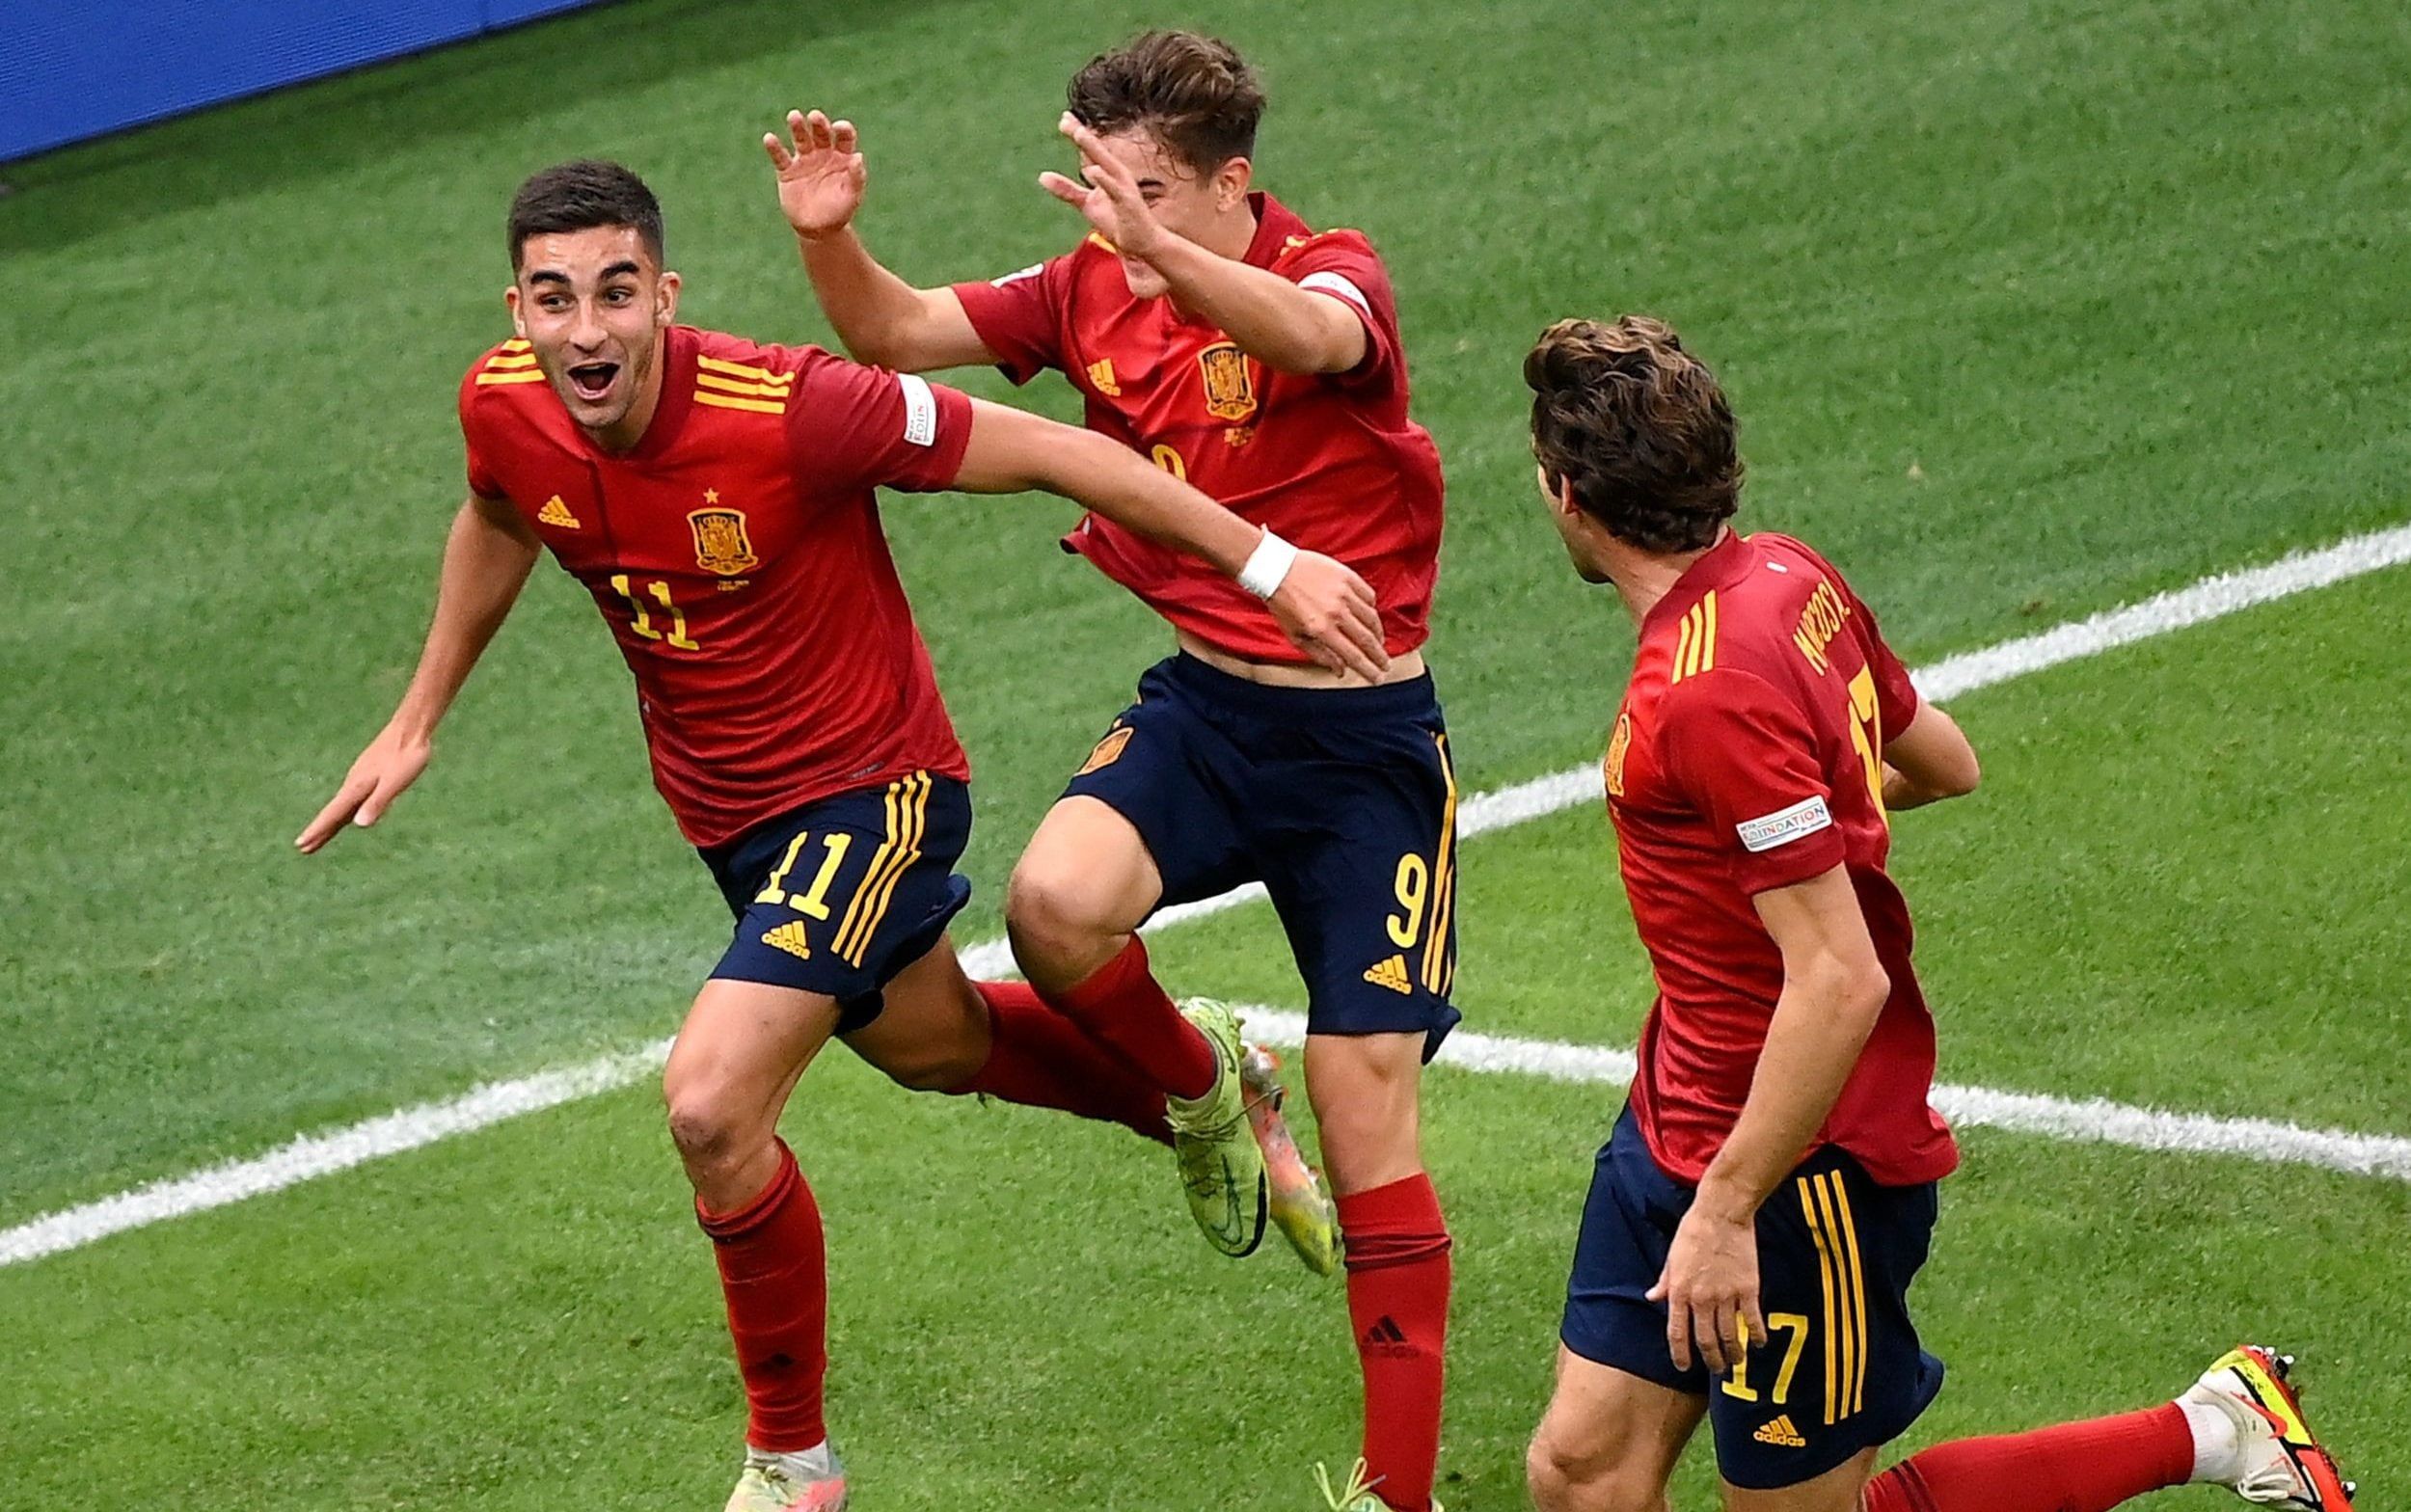 Spain At the Qatar World Cup 2022: Group, Schedule of Matches, Star Players, Roster and Coach